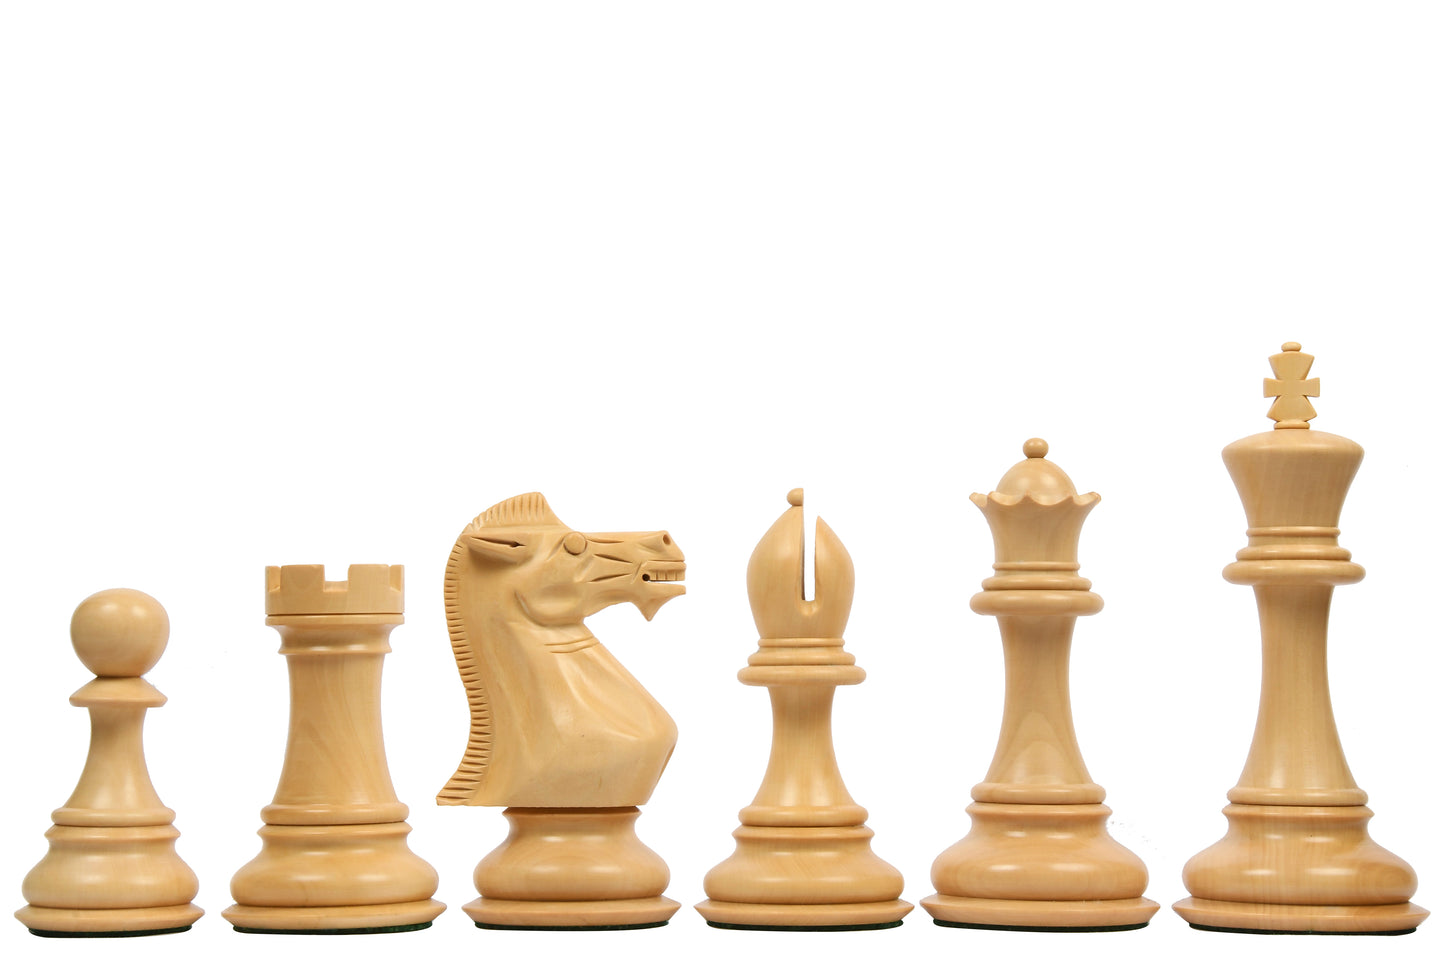 The Giant Monstrous Series Staunton Chess Pieces in Bud Rose & Box Wood - 6.0" King